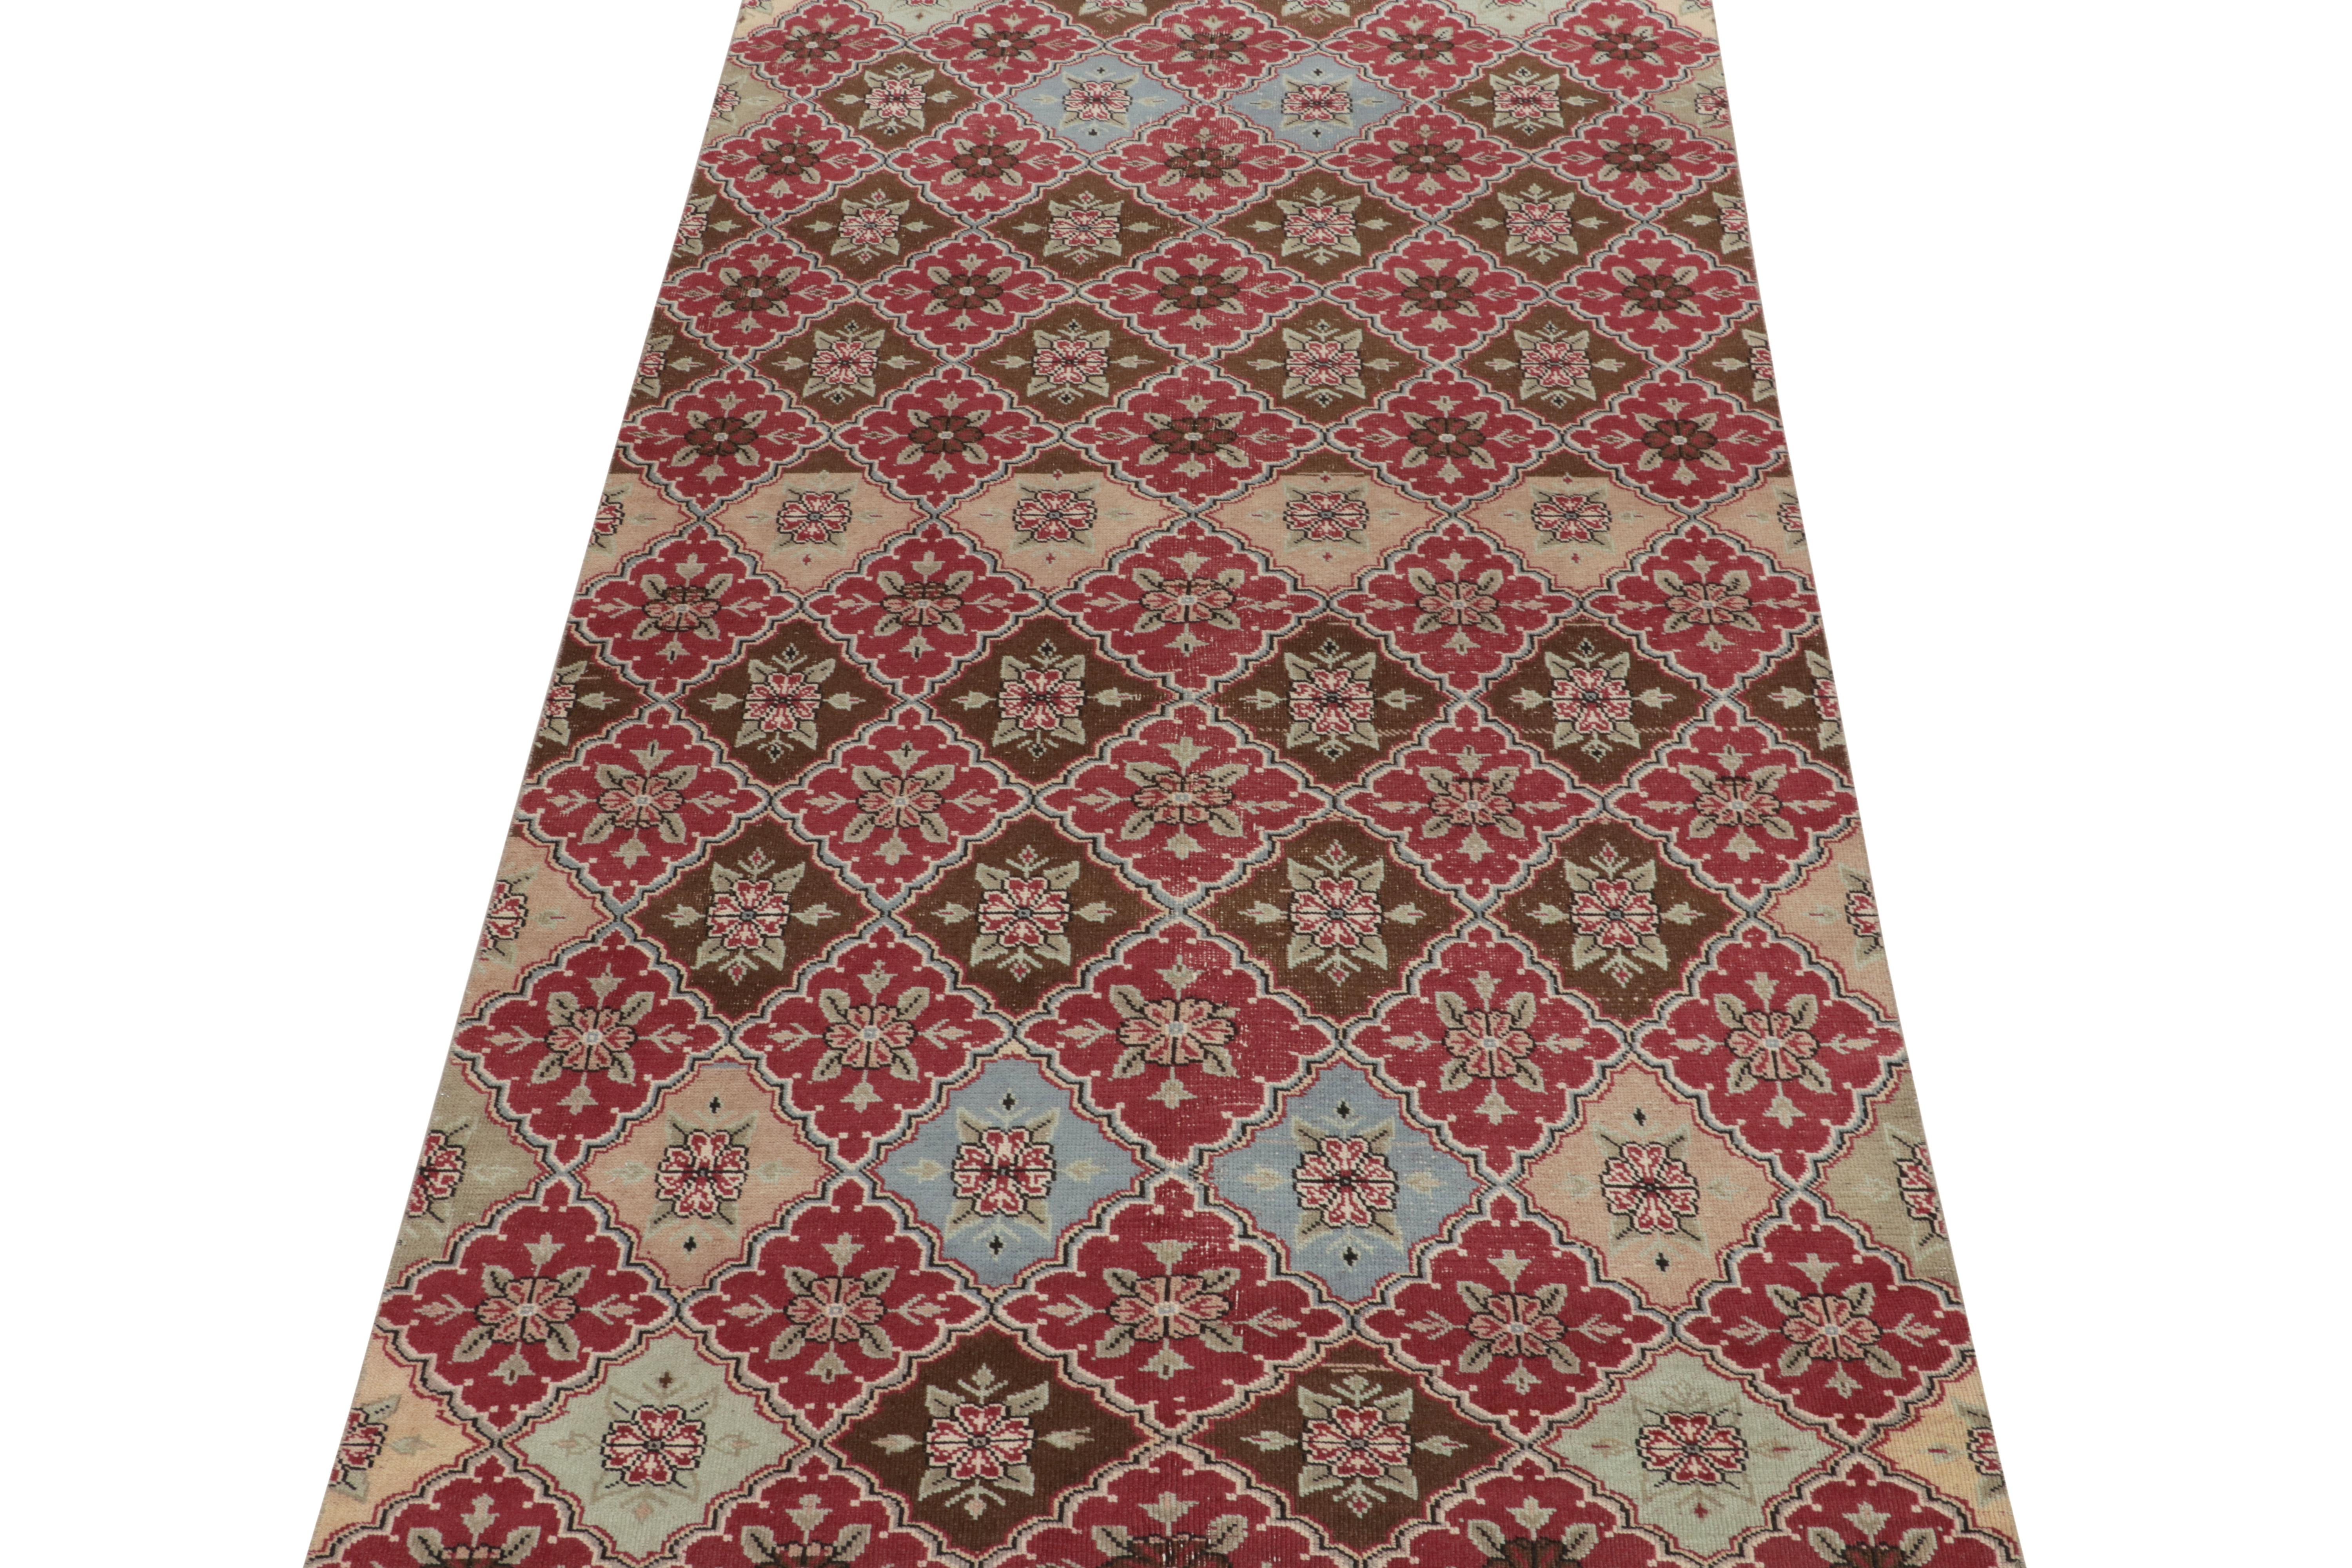 A 5x9 vintage rug exemplifying Turkish art deco sensibilities, among the latest to join our Mid Century Pasha Collection. 

Coming from a bold Turkish designer, this 1960s piece features a well defined trellis floral pattern in a rich, rare